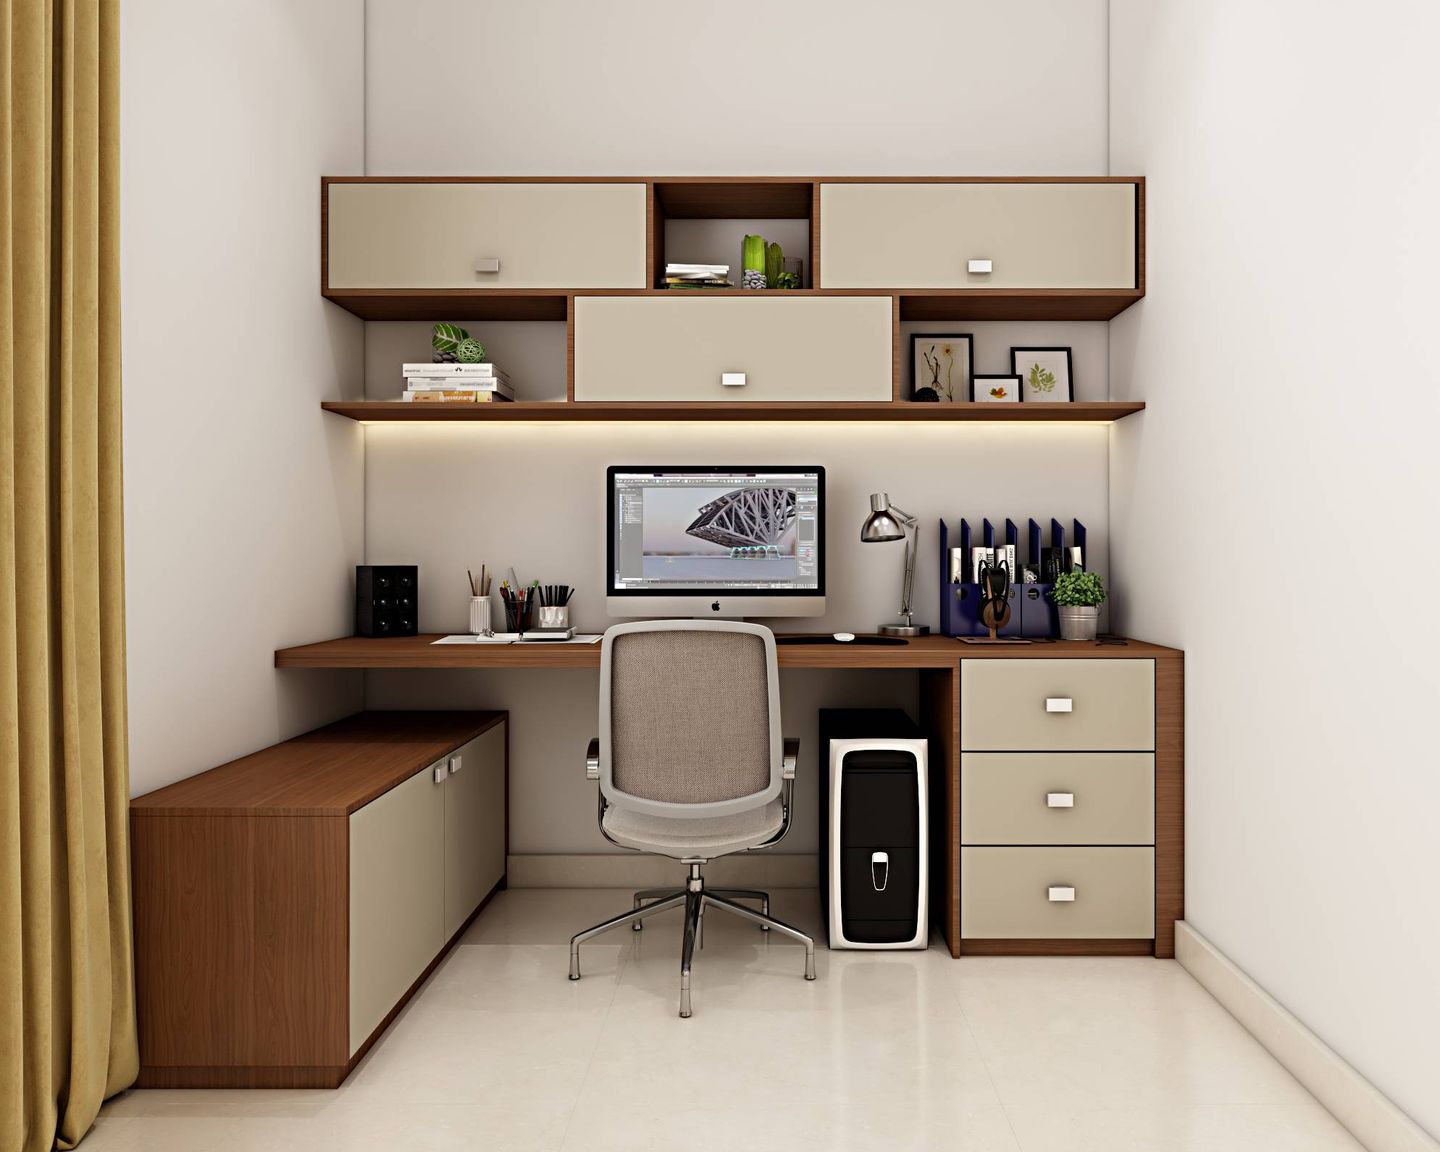 Modern Home Office Design In Wood And Beige - Livspace